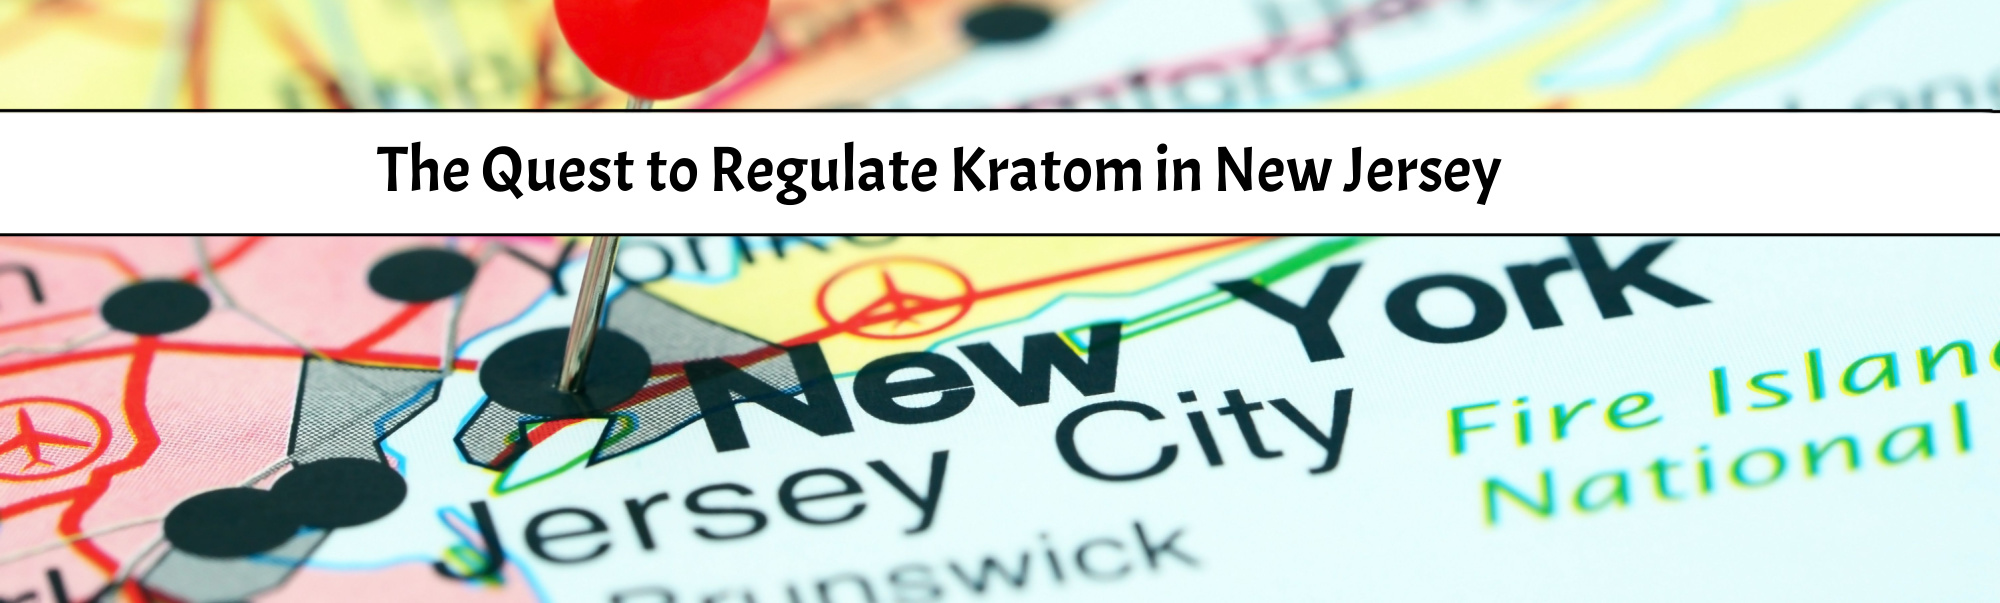 image of the quest to regulate kratom in new jersey